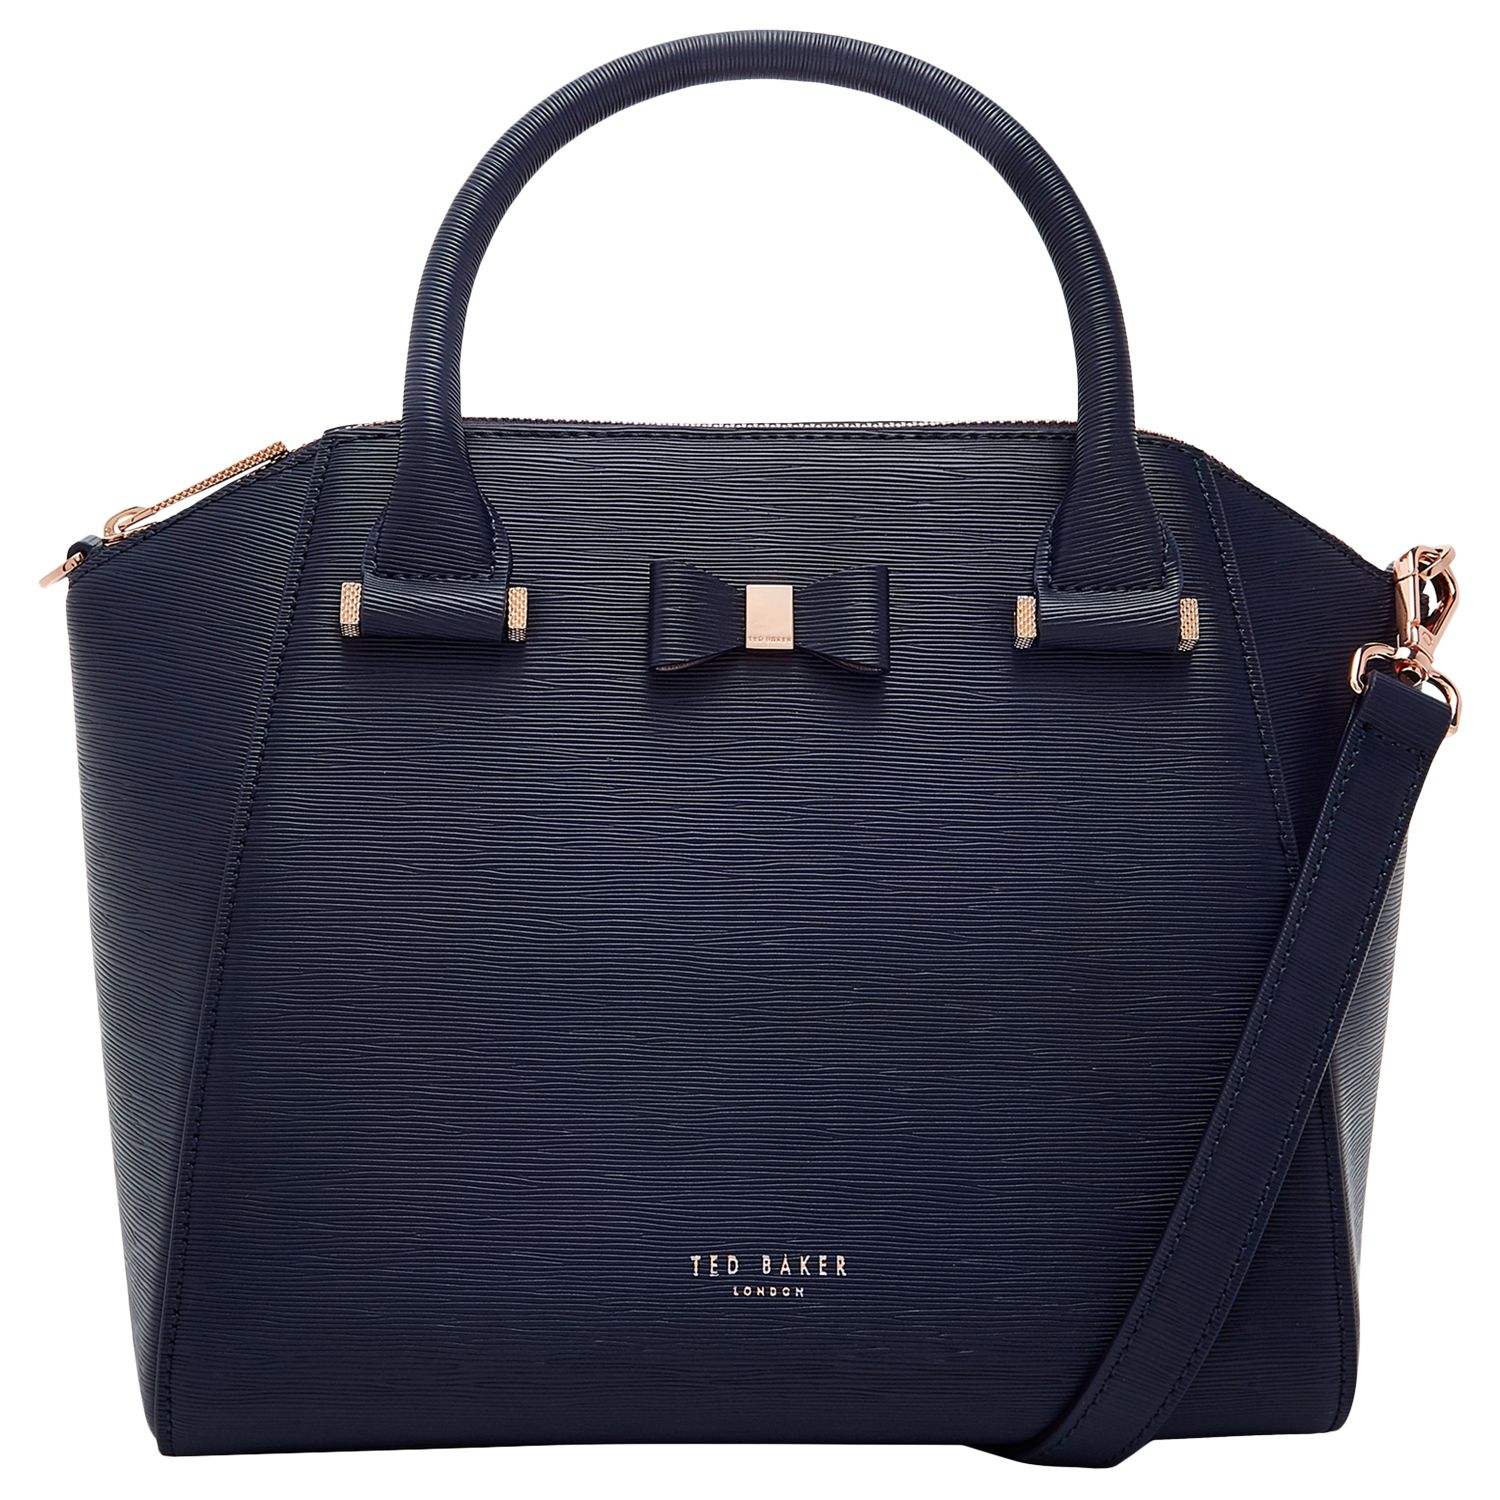 Ted Baker Cala Bow Small Leather Tote Bag at John Lewis & Partners